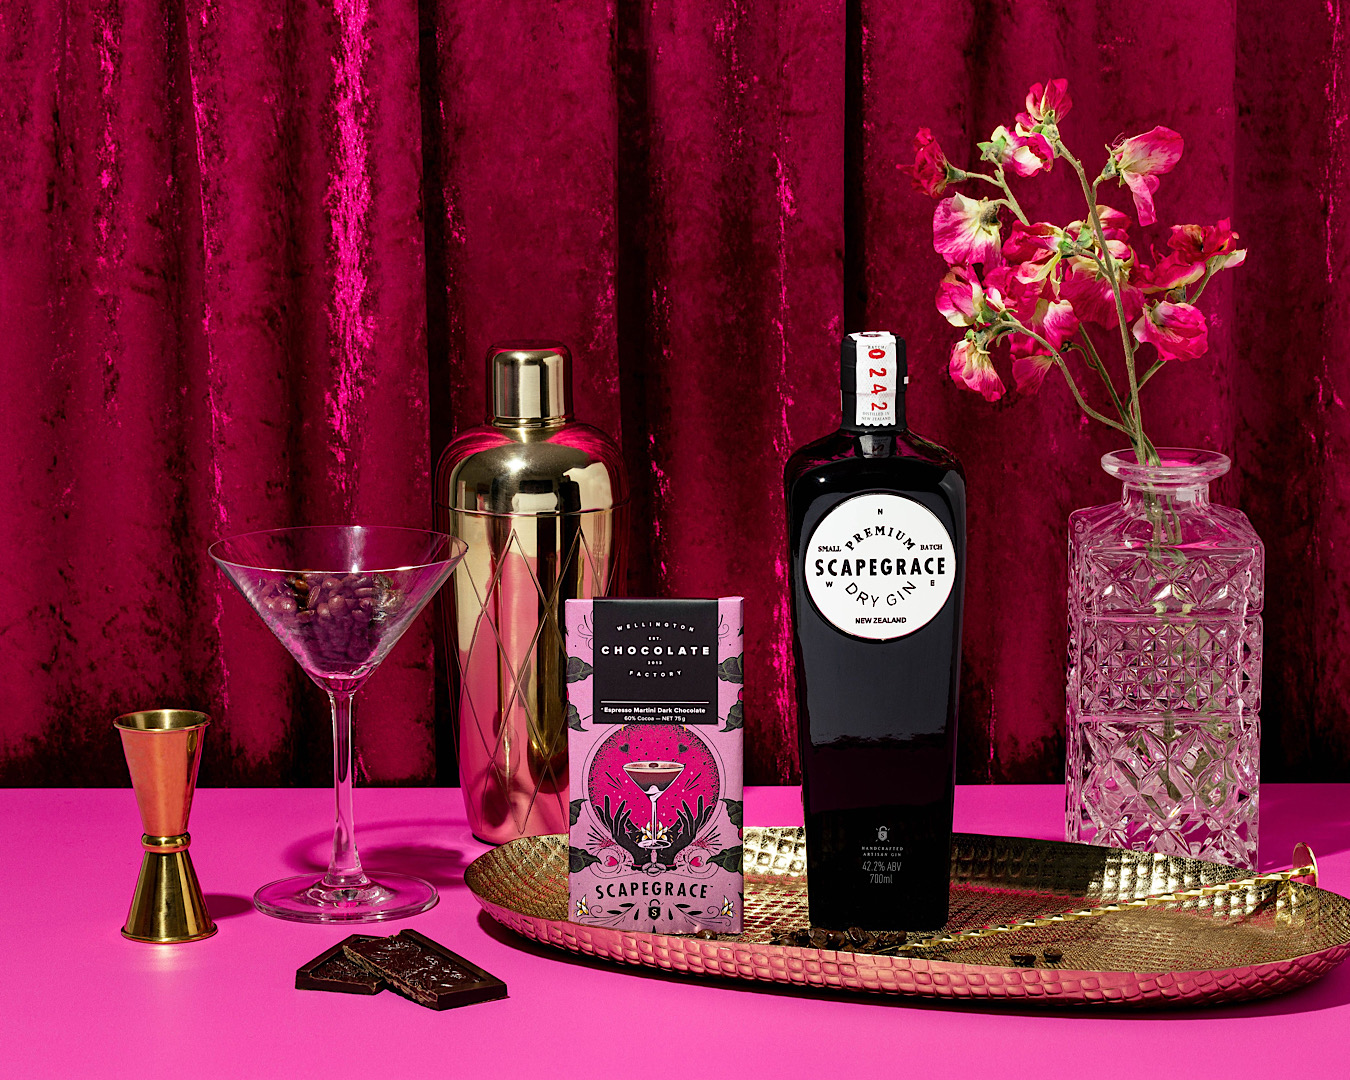 A chocolate bar covered in a pink wrapper of a chic cartoon martini image stands against a pinky red velvet vibes curtain, perched on a gold tray and accompanied by a bottle of Scapegrace gin, a retro vase with flowers, a cocktail shaker and a martini glass filled with coffee beans. 